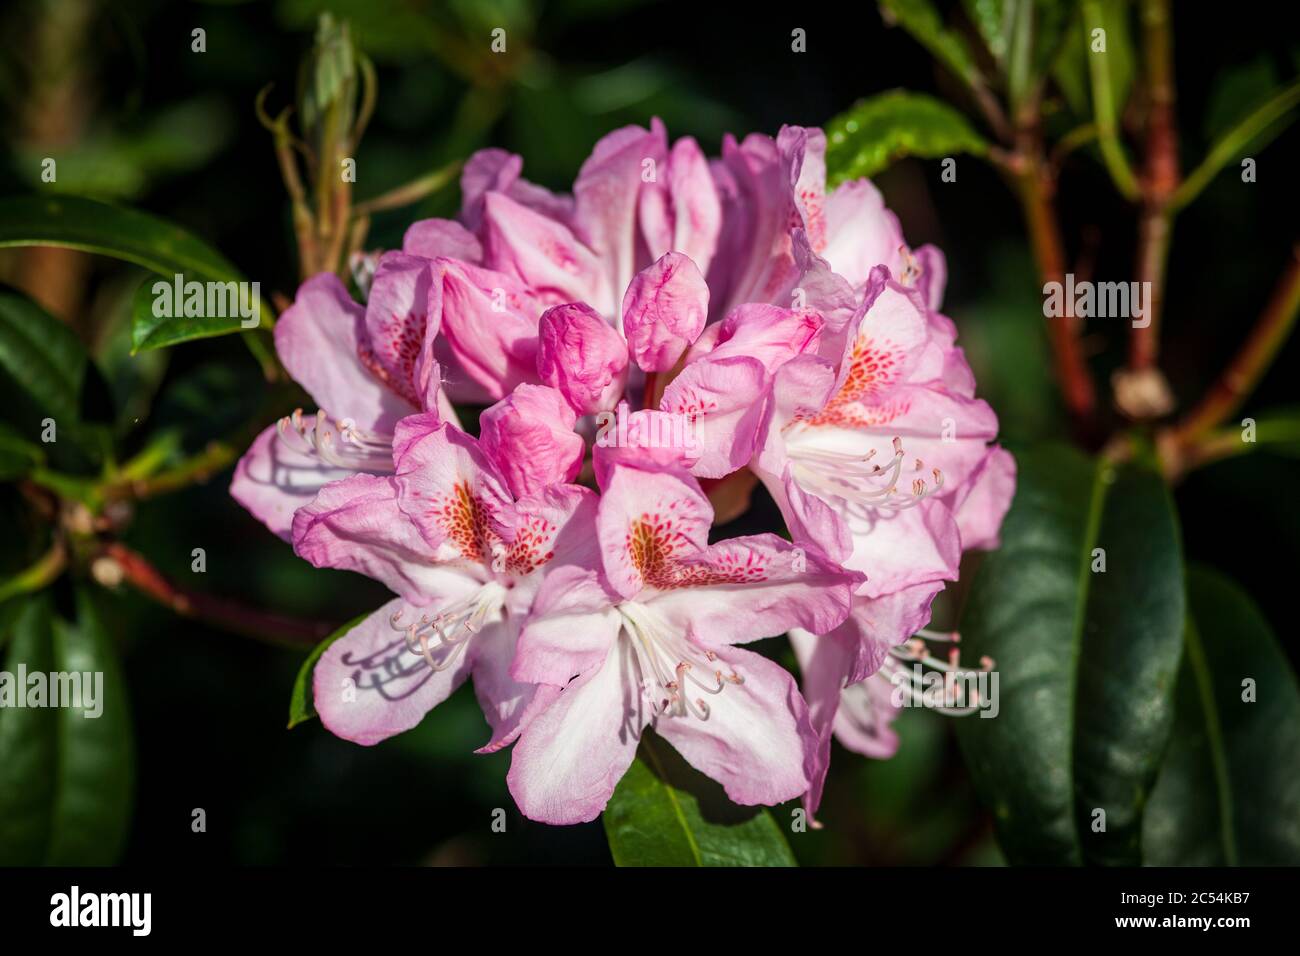 Pink rhododendron flower Stock Photo